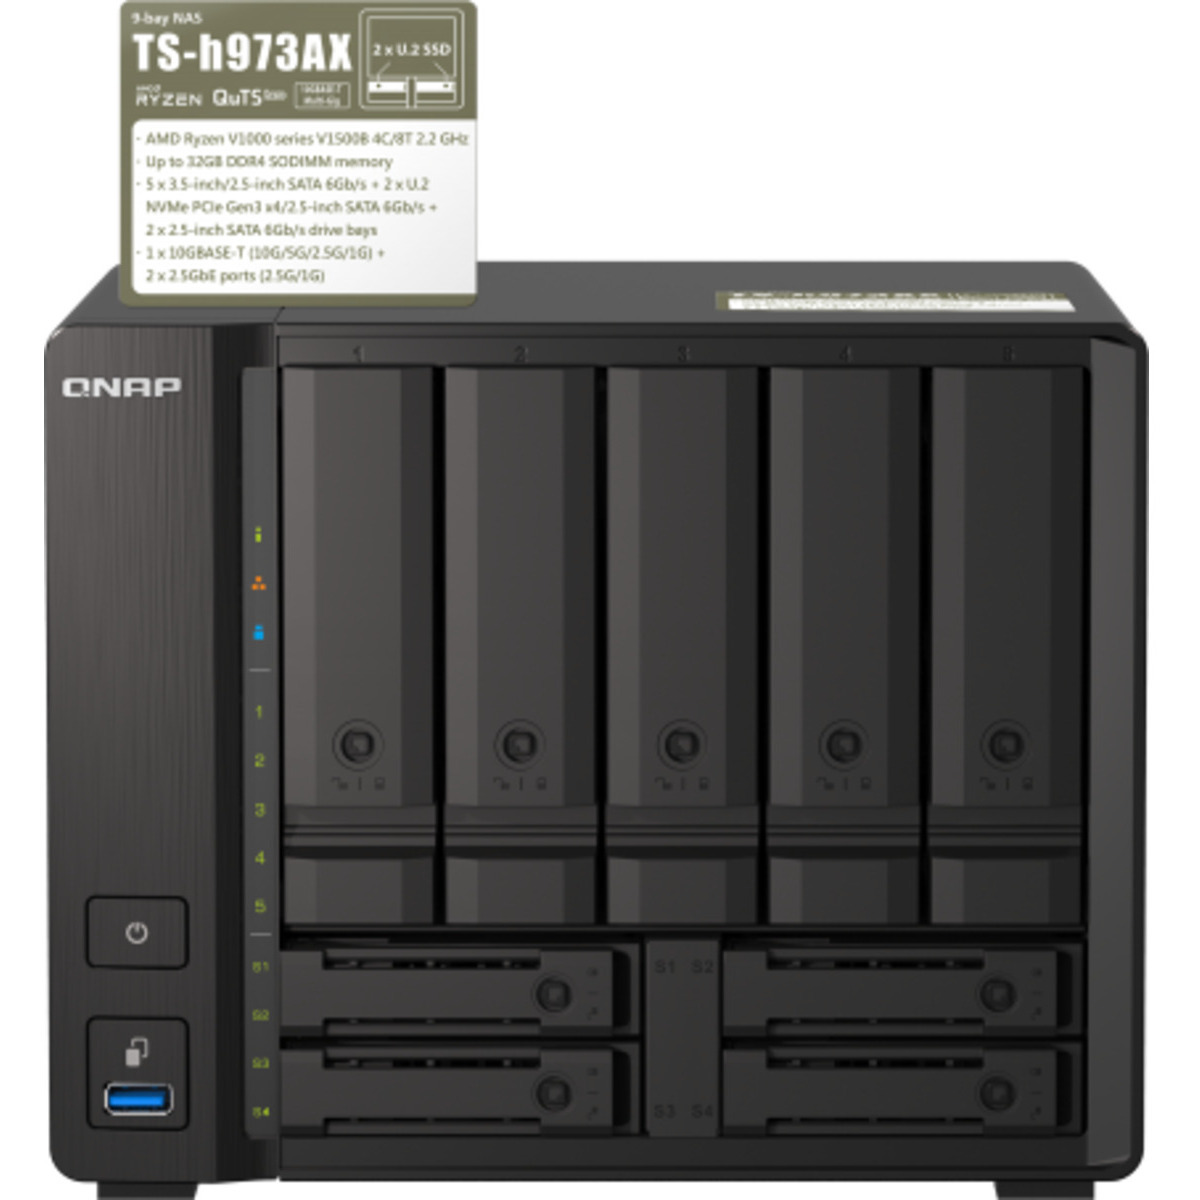 QNAP TS-h973AX  20tb 5+4-Bay Desktop Multimedia / Power User / Business NAS - Network Attached Storage Device 5x4tb Western Digital Red Pro WD4005FFBX 3.5 7200rpm SATA 6Gb/s HDD NAS Class Drives Installed - Burn-In Tested TS-h973AX 